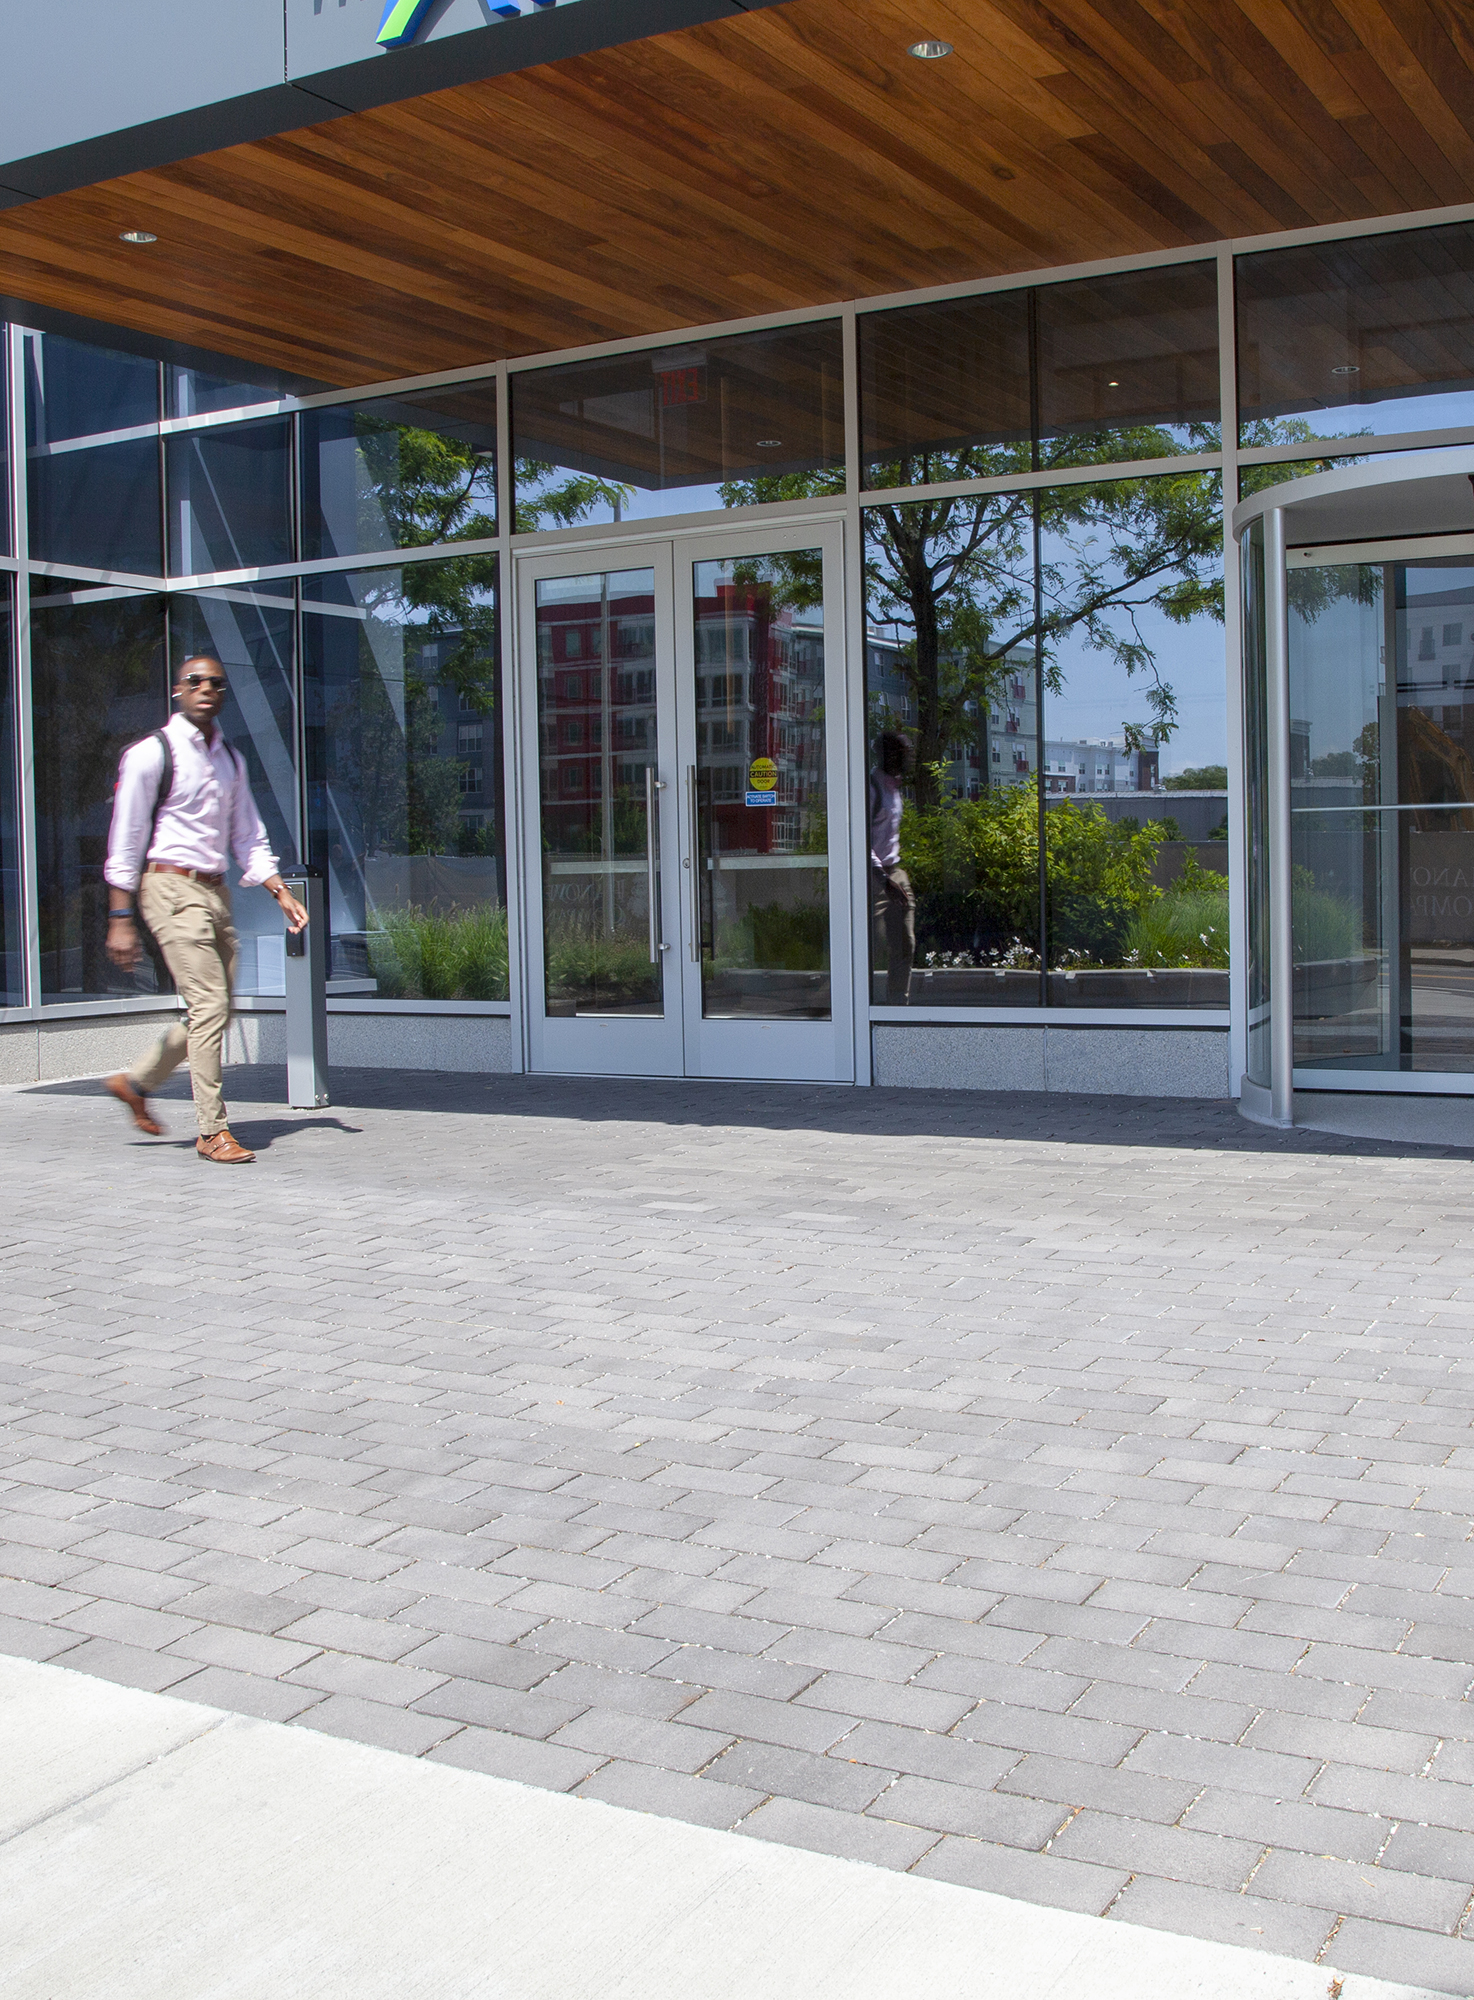 A man walks in front of the entrance of a building, on an area paved with Unilock Eco-Priora permeable pavers.